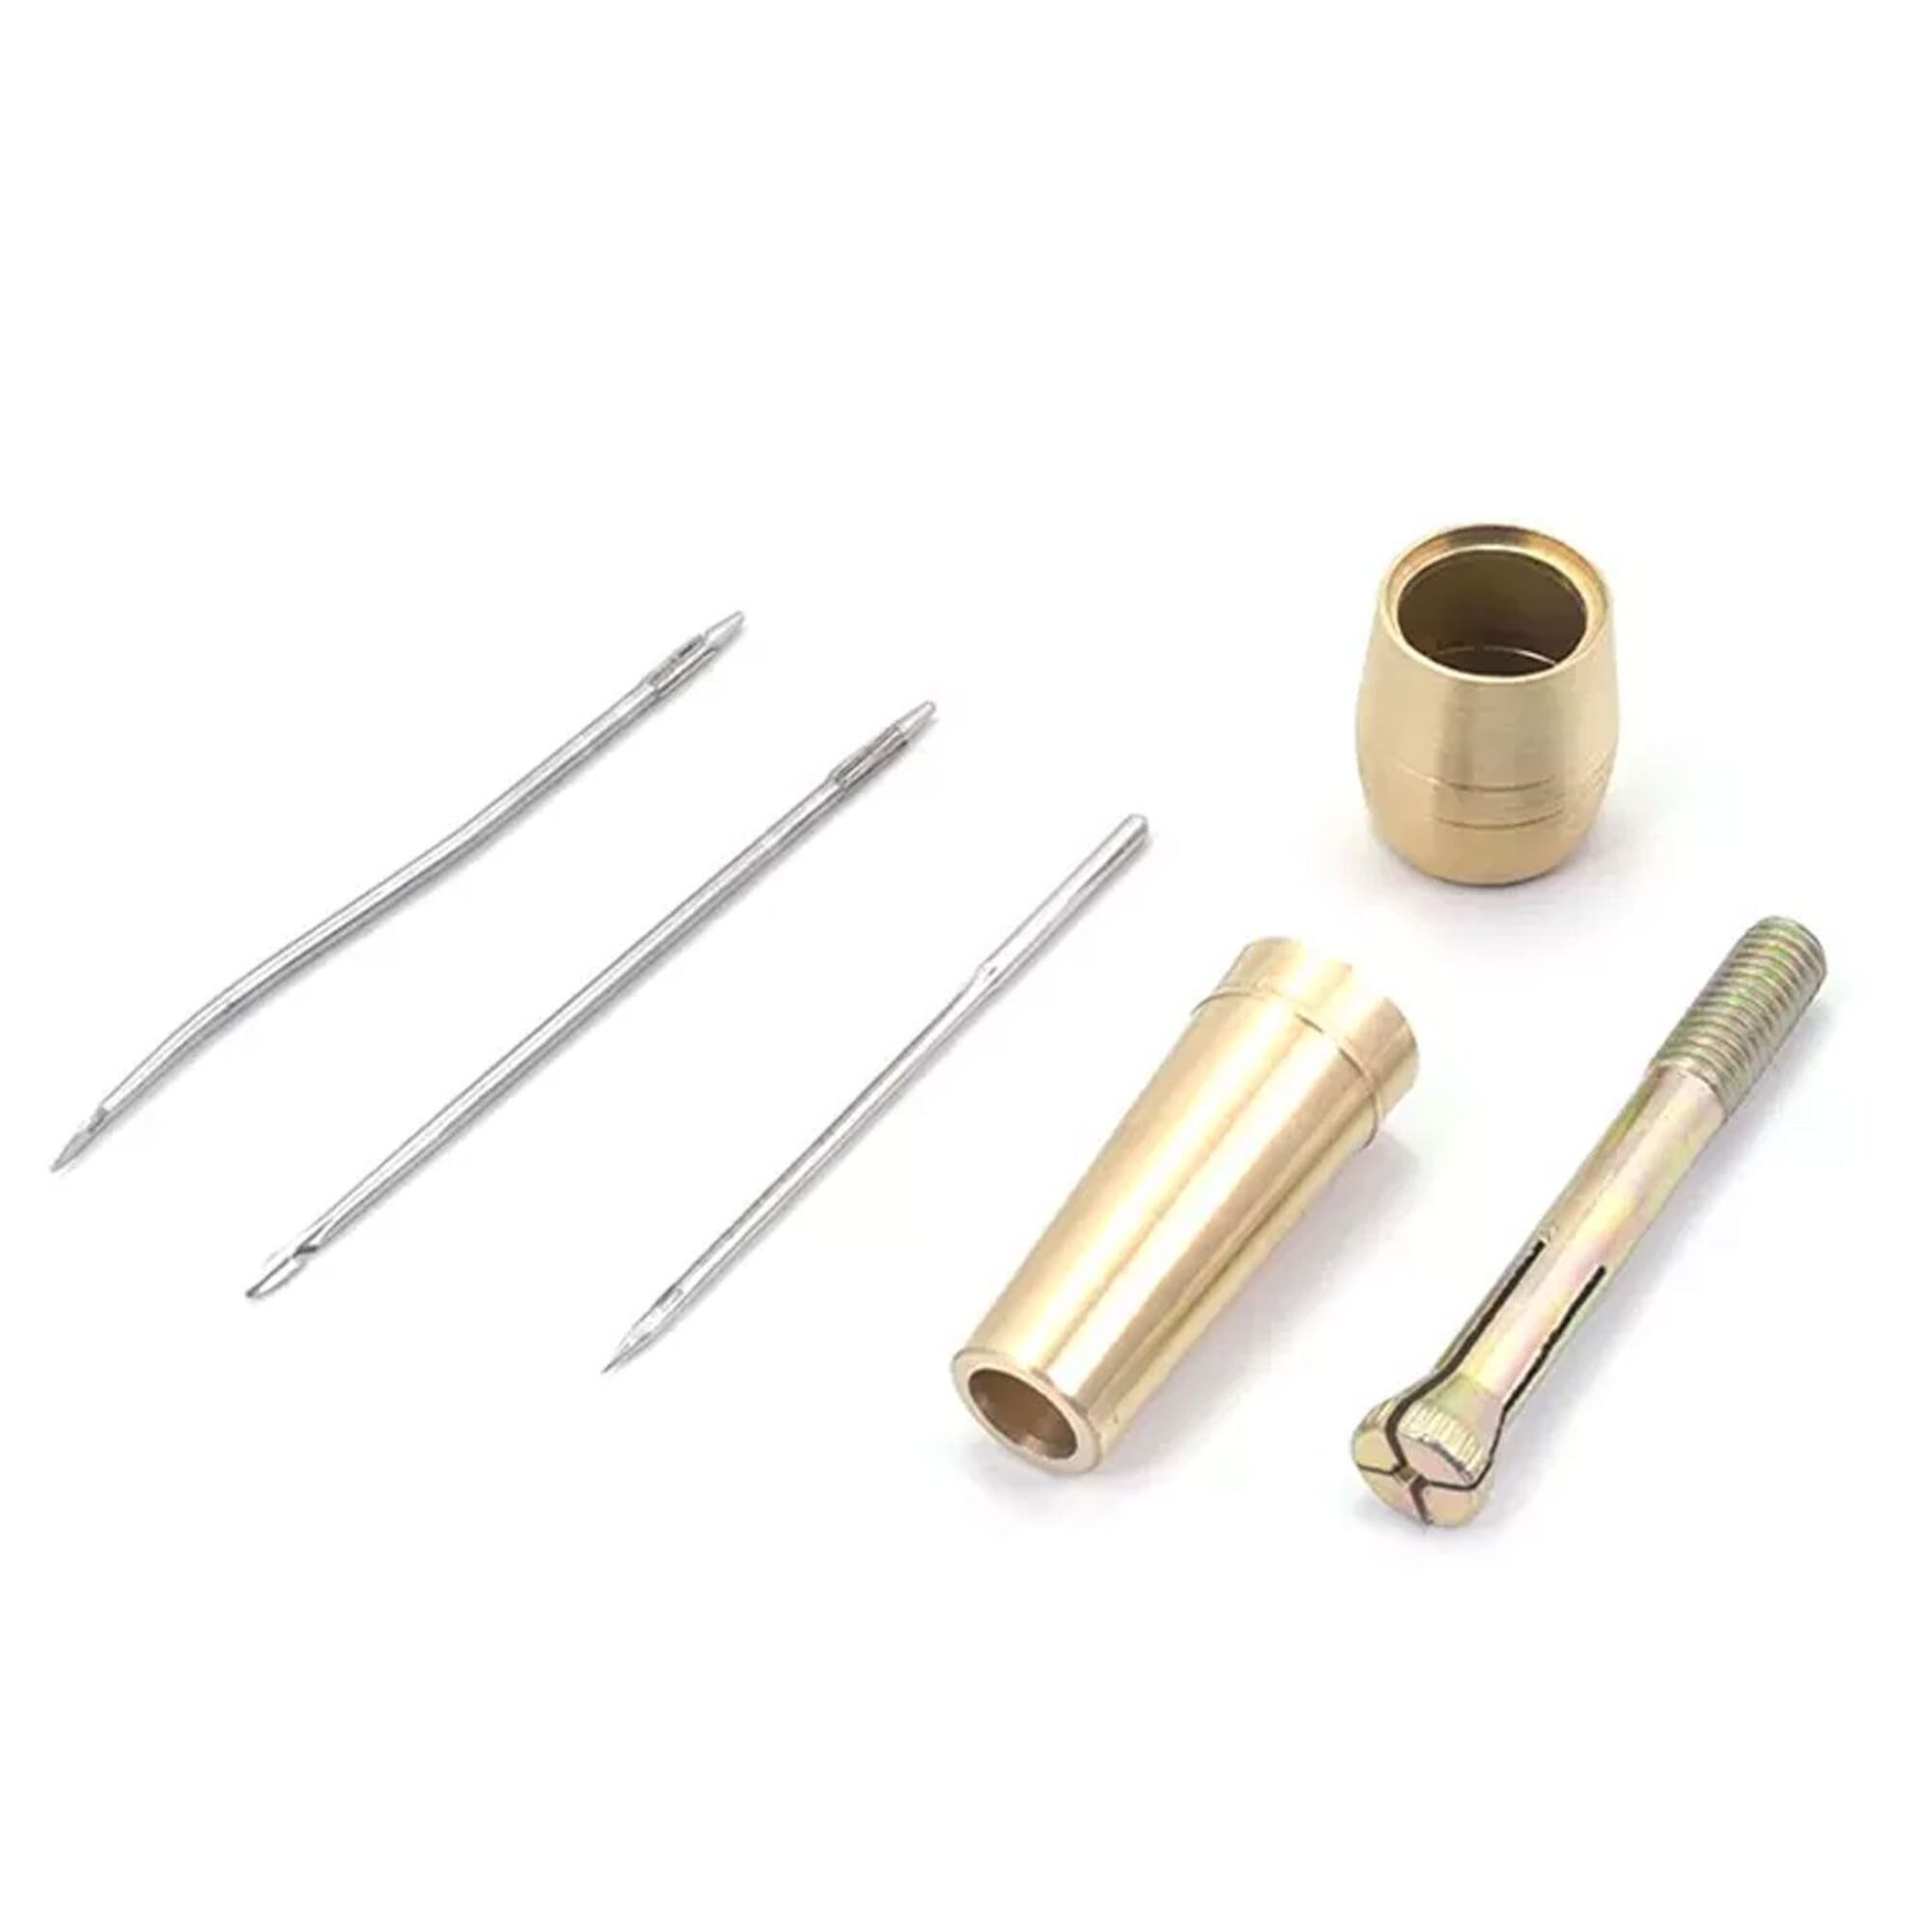 NSI Leather Thread Stitching Needles Awl Hand Tools Kit for DIY Sewing Craft 48pcs, Other